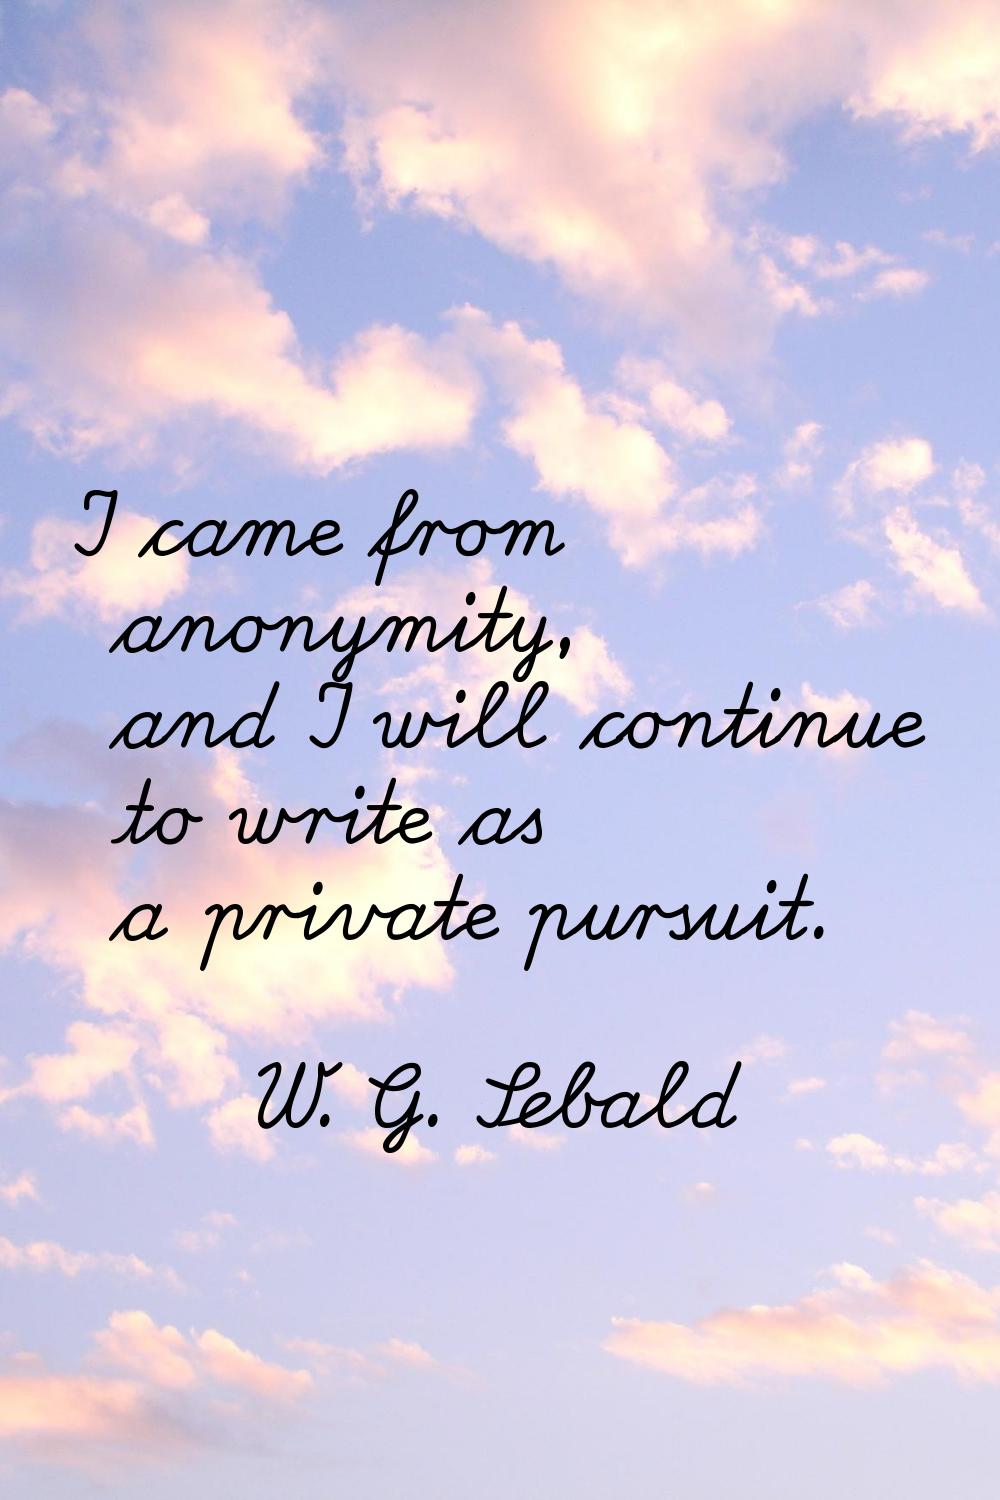 I came from anonymity, and I will continue to write as a private pursuit.